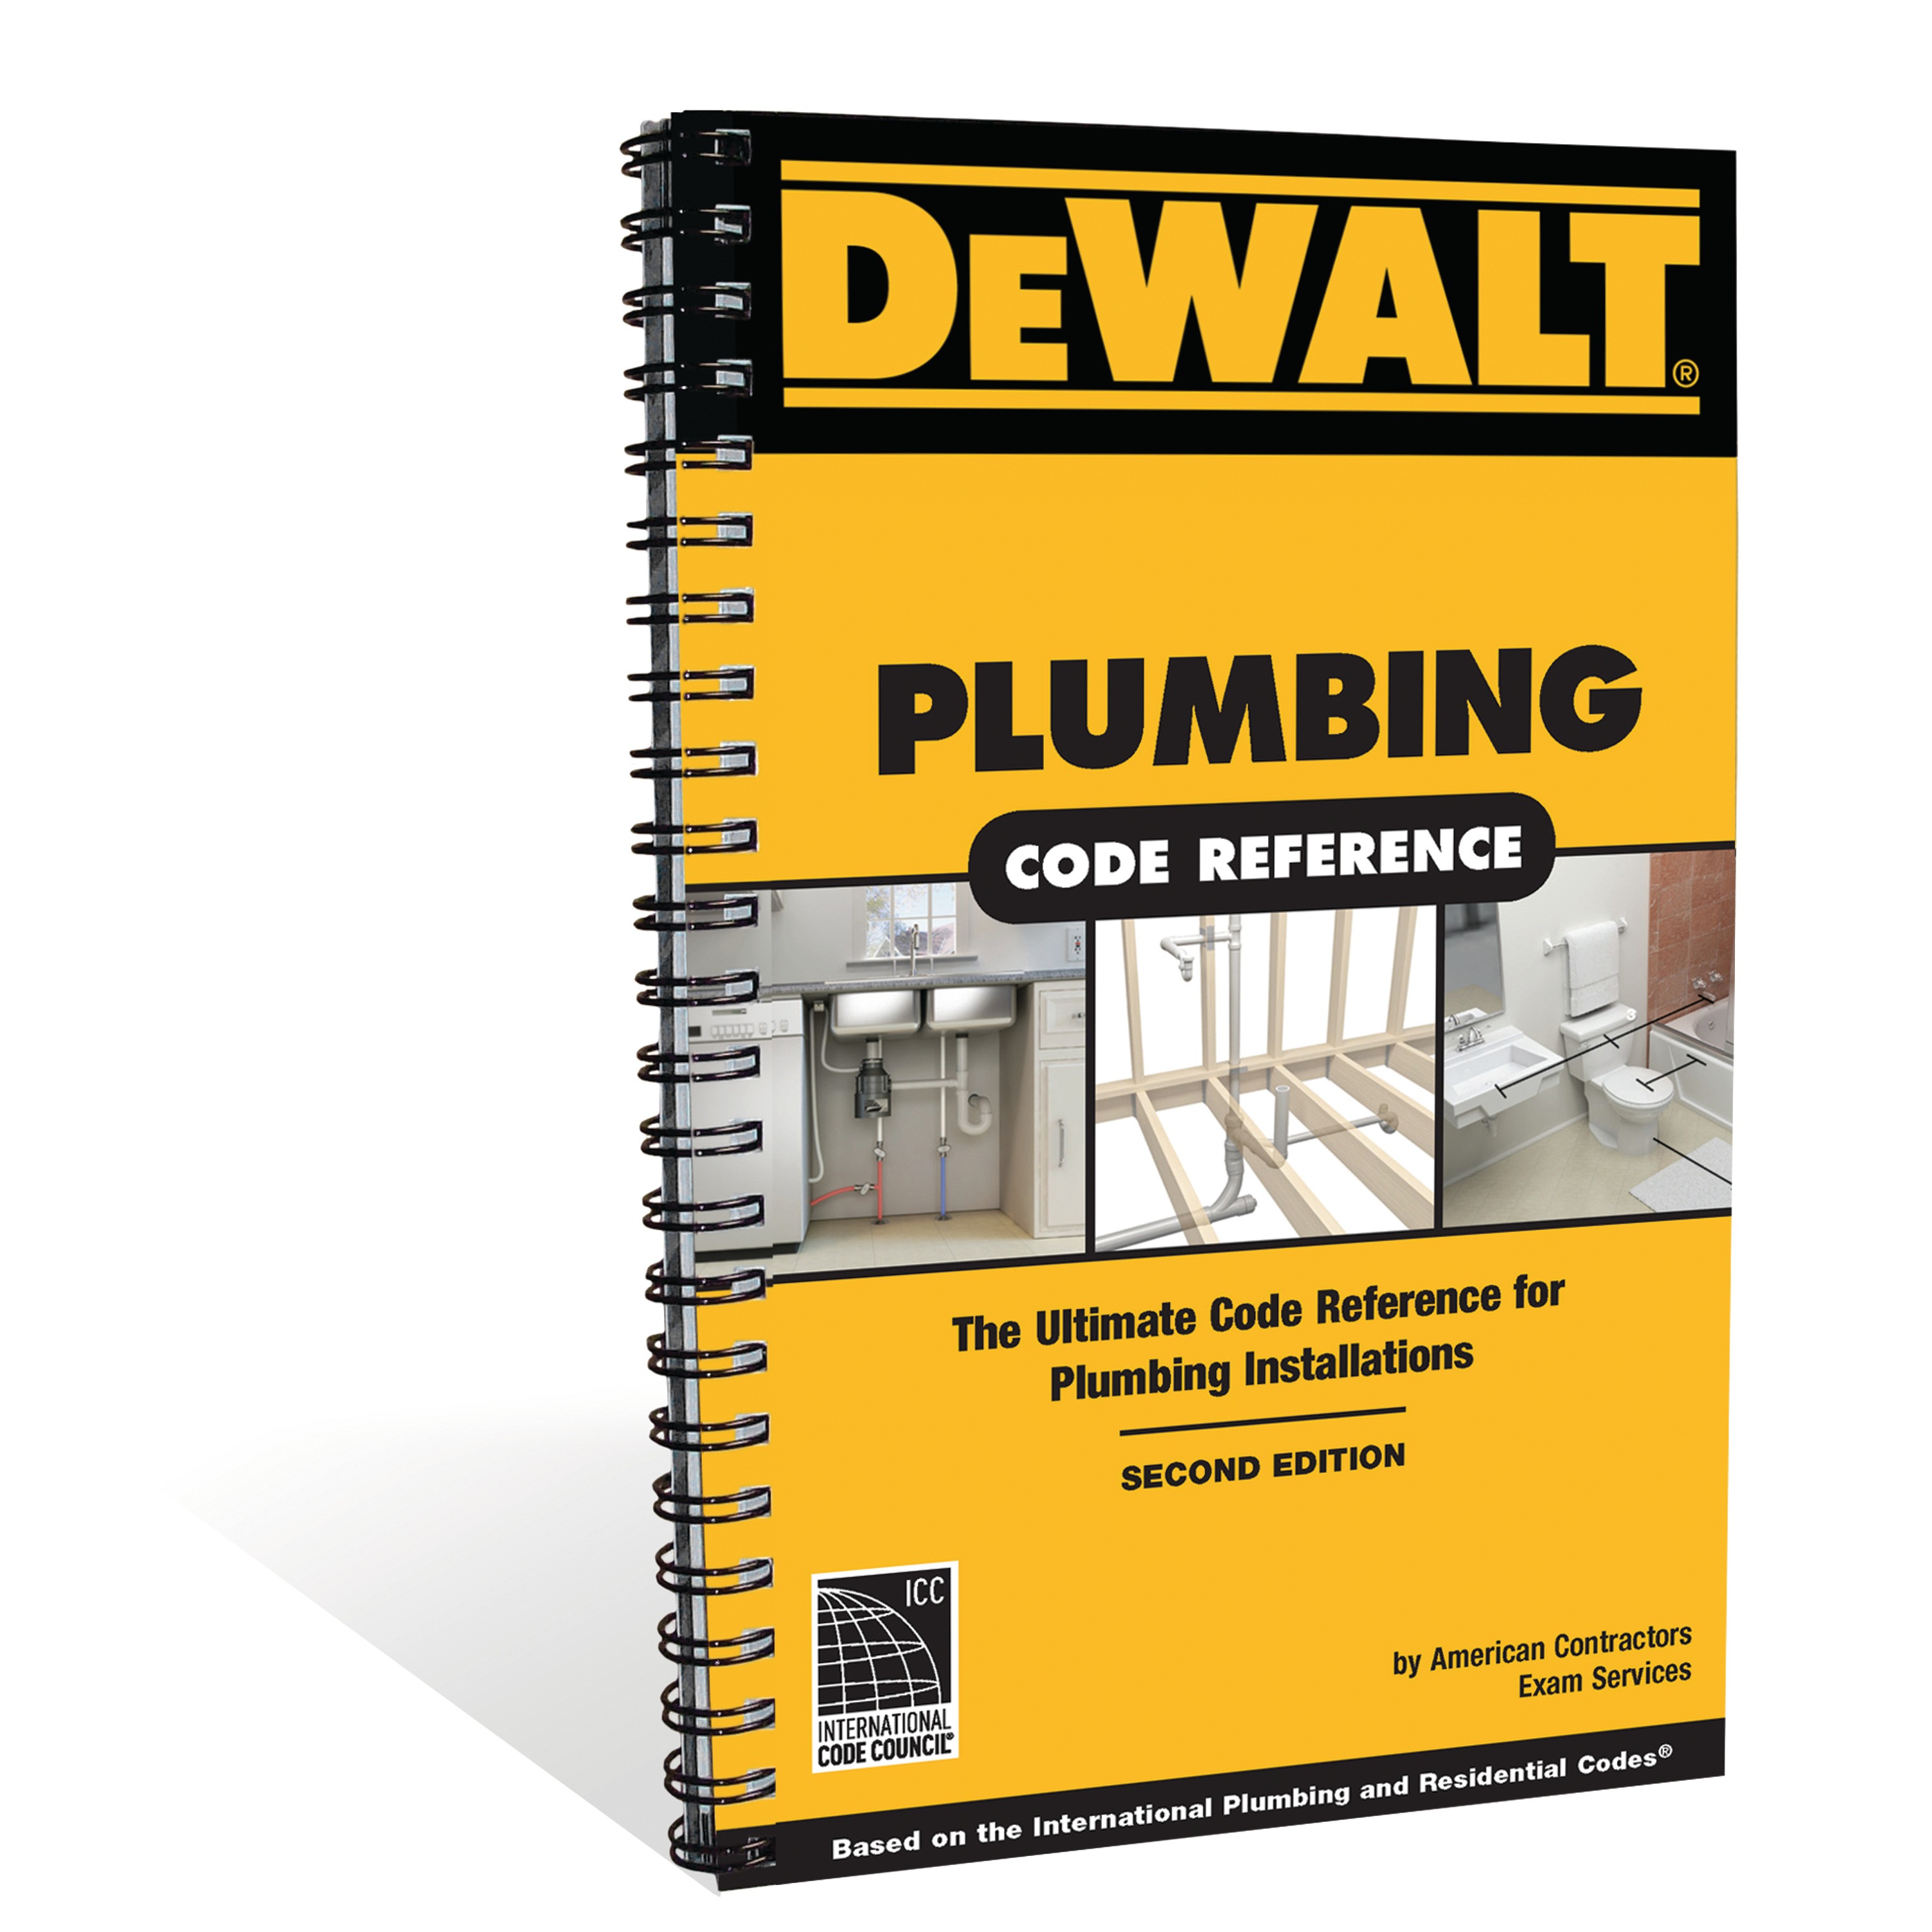 Plumbing Code Reference, 2nd Edition Based on the International